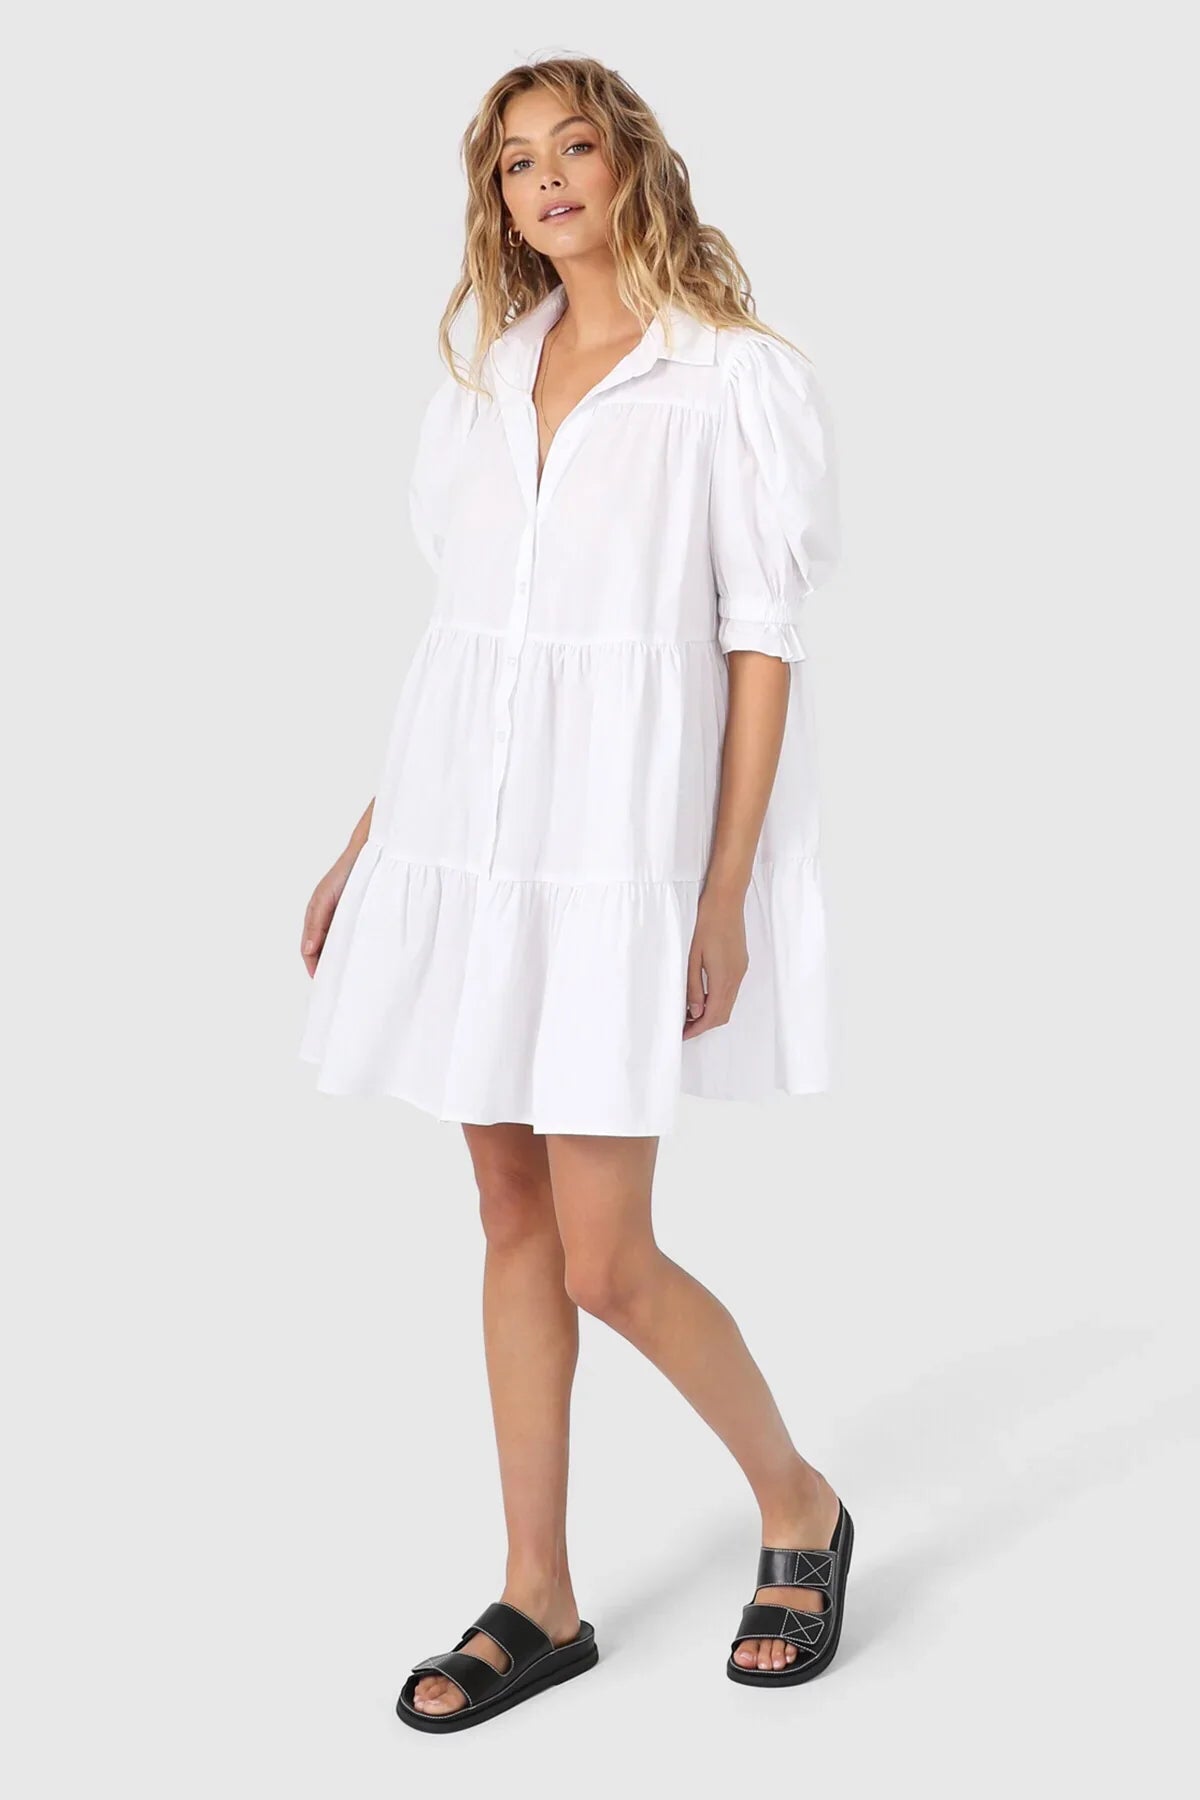 Pre-Loved, Madison The Label Cecile Dress White